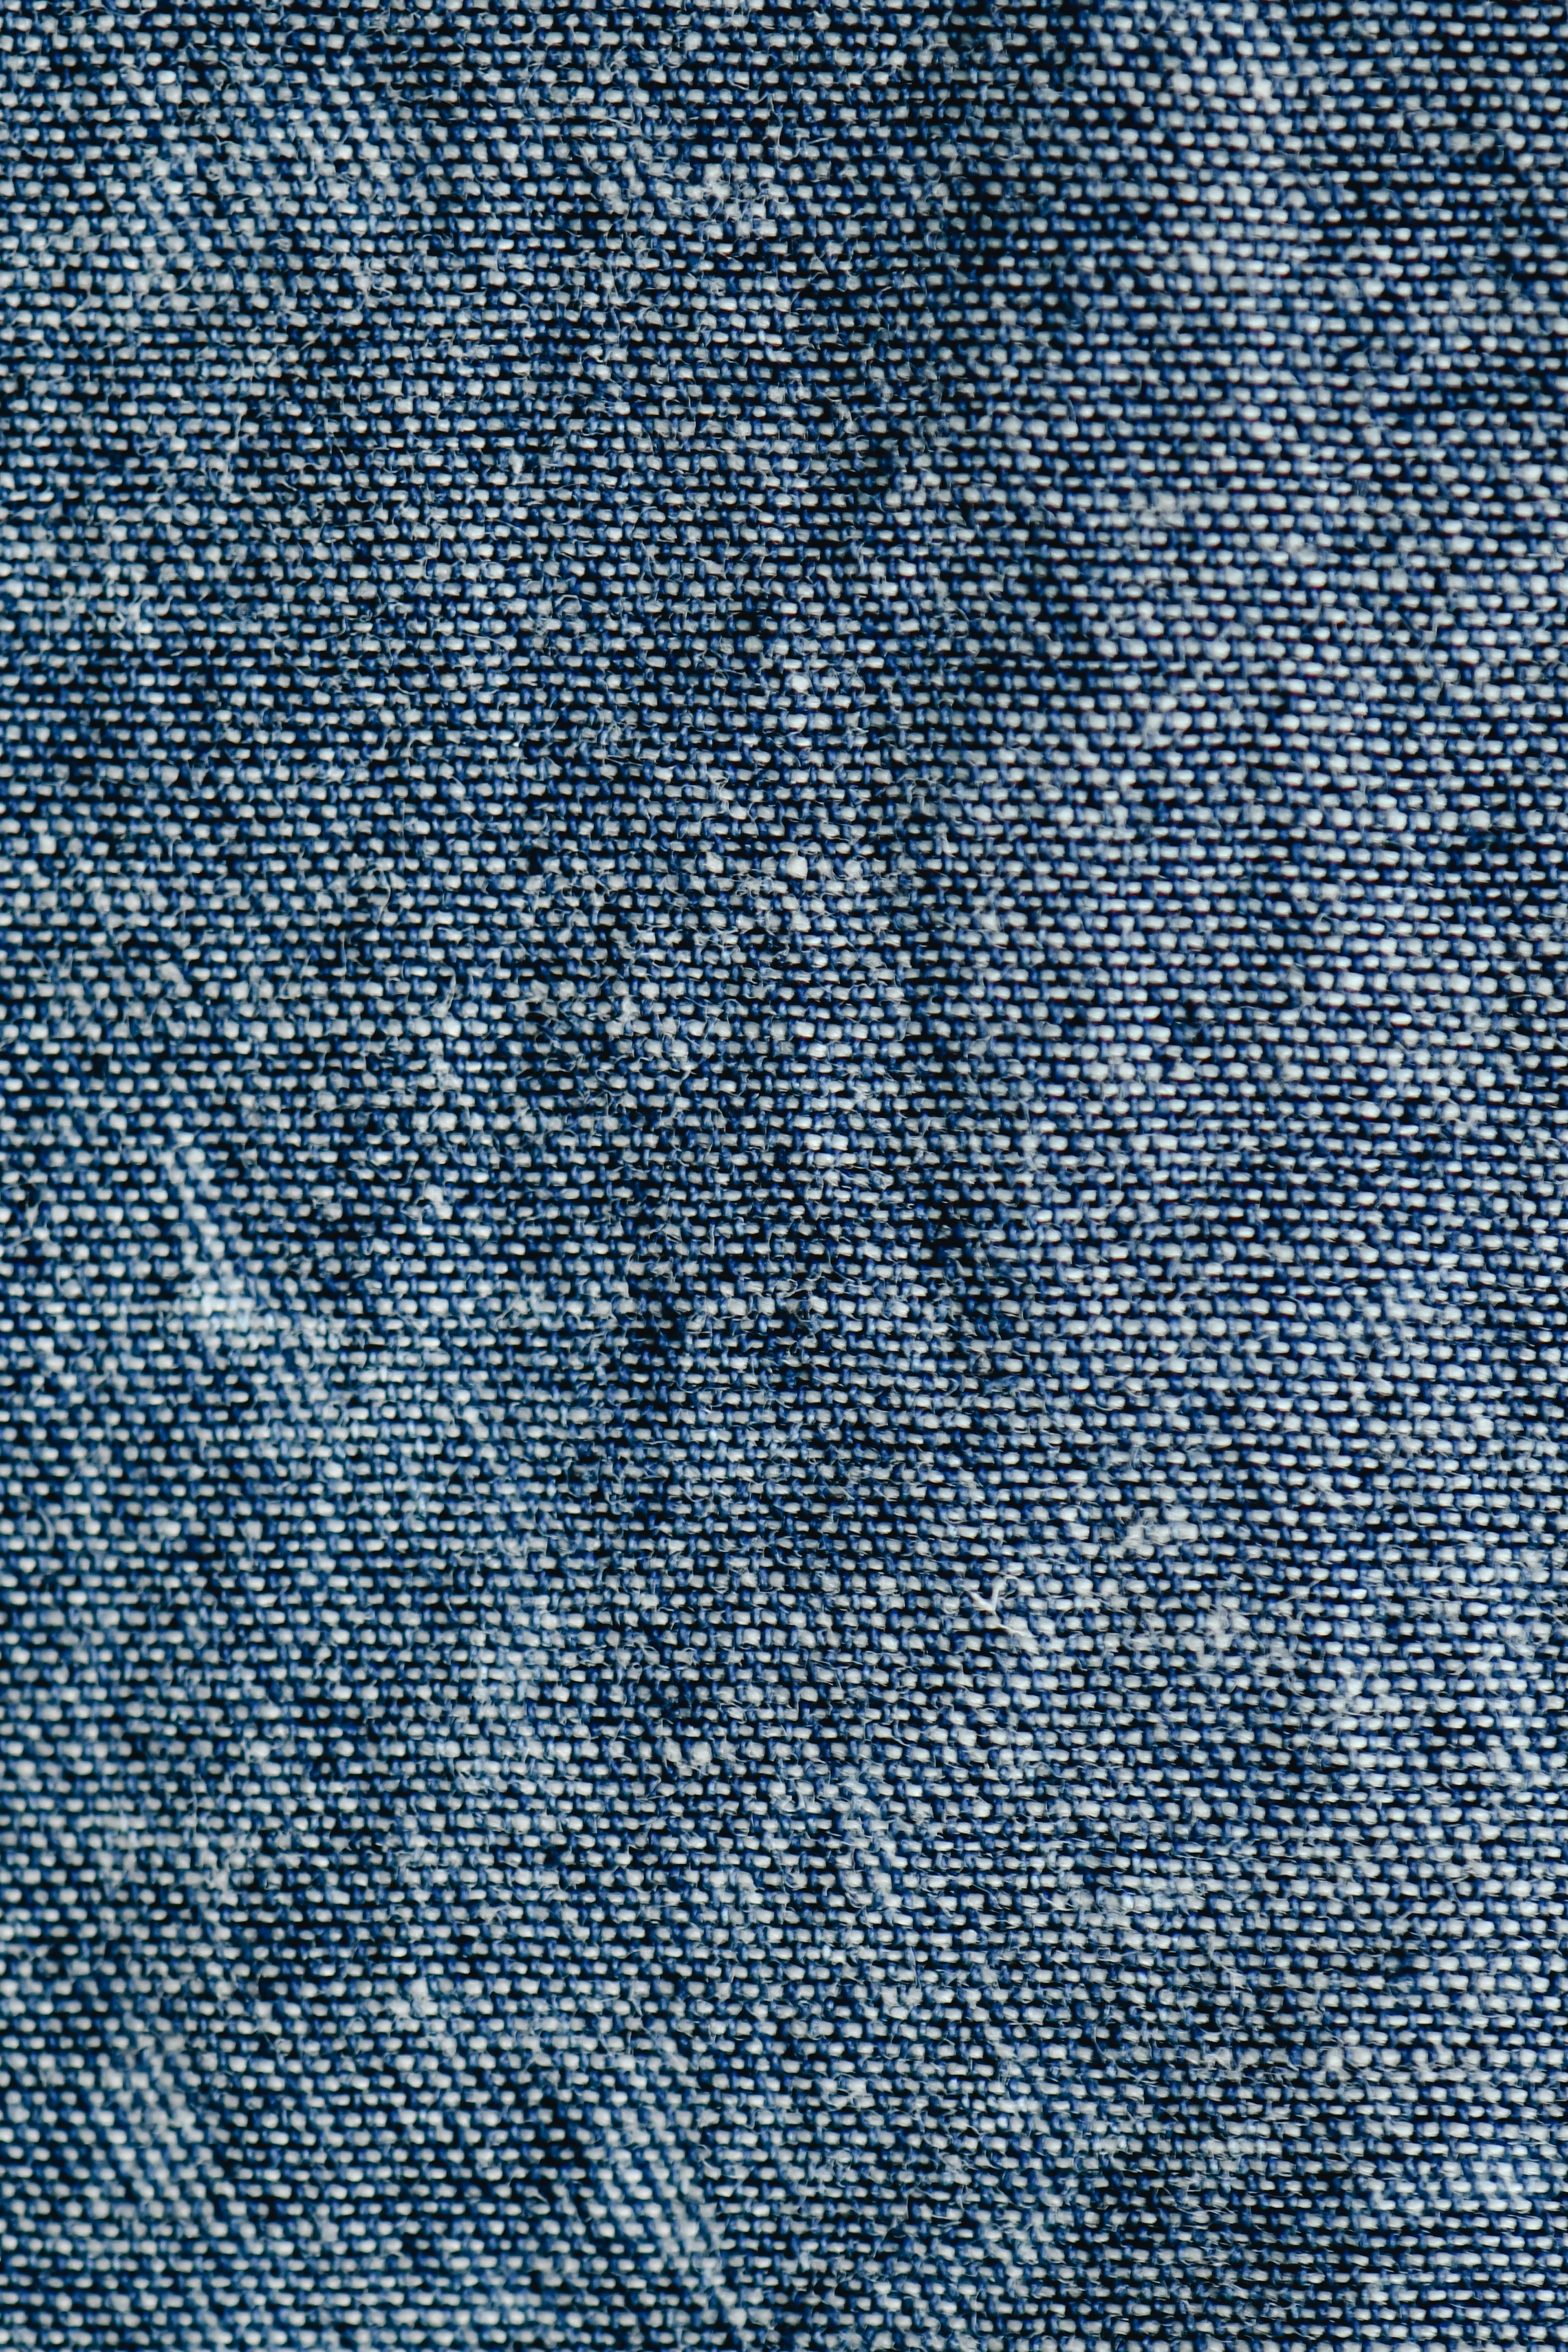 7,685 Denim Texture Light Blue Jeans Background Stock Photos - Free &  Royalty-Free Stock Photos from Dreamstime